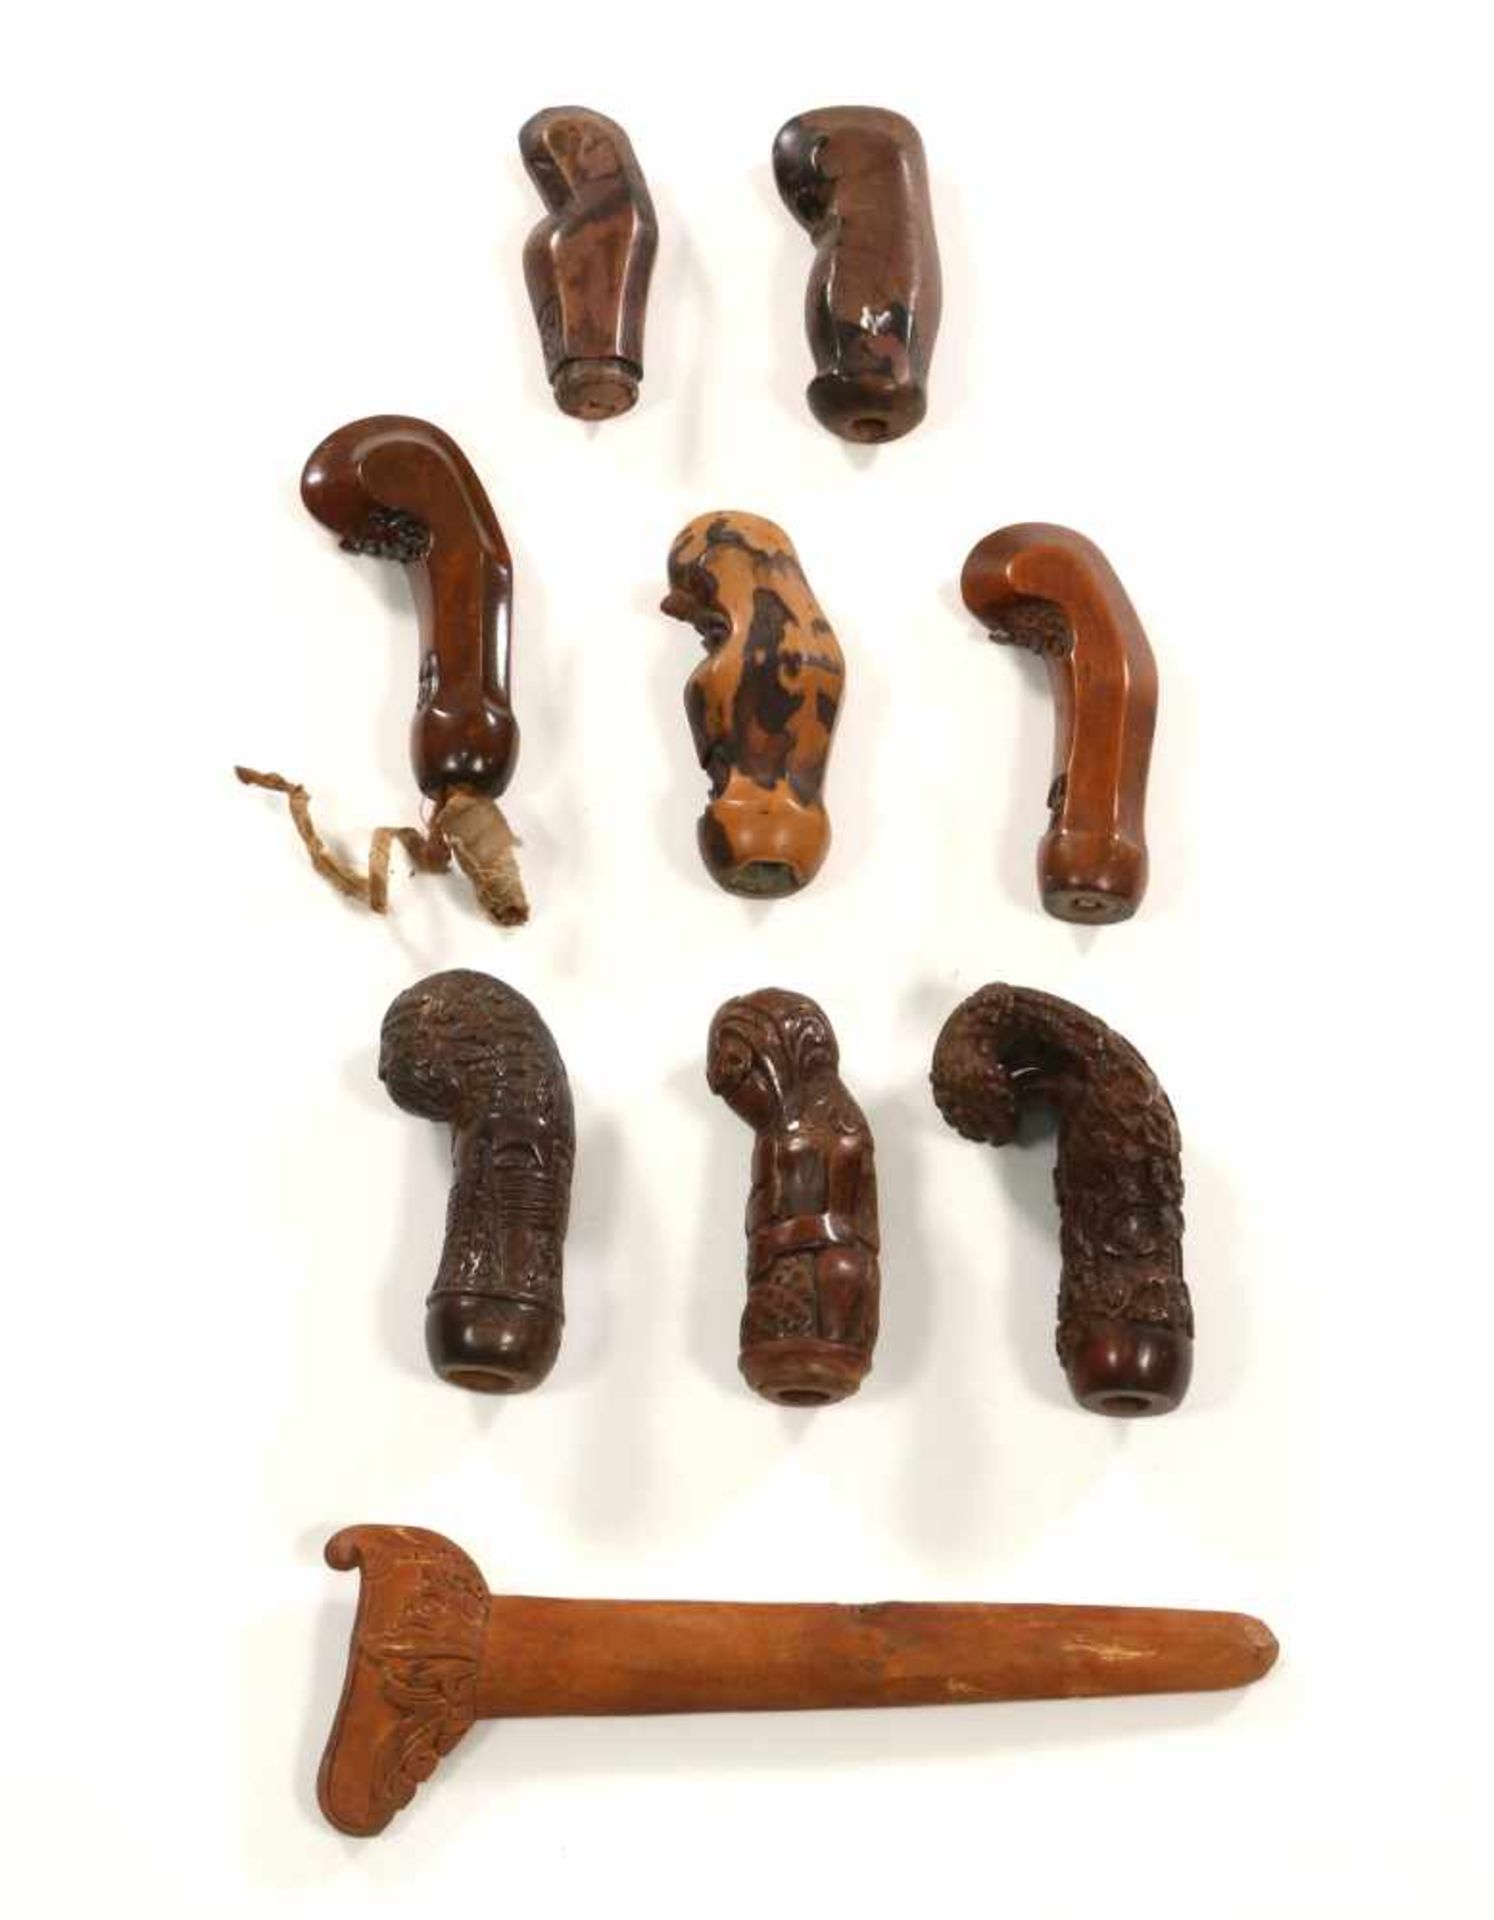 Indonesia, eight wooden keris handles and one sheath., [zk]200